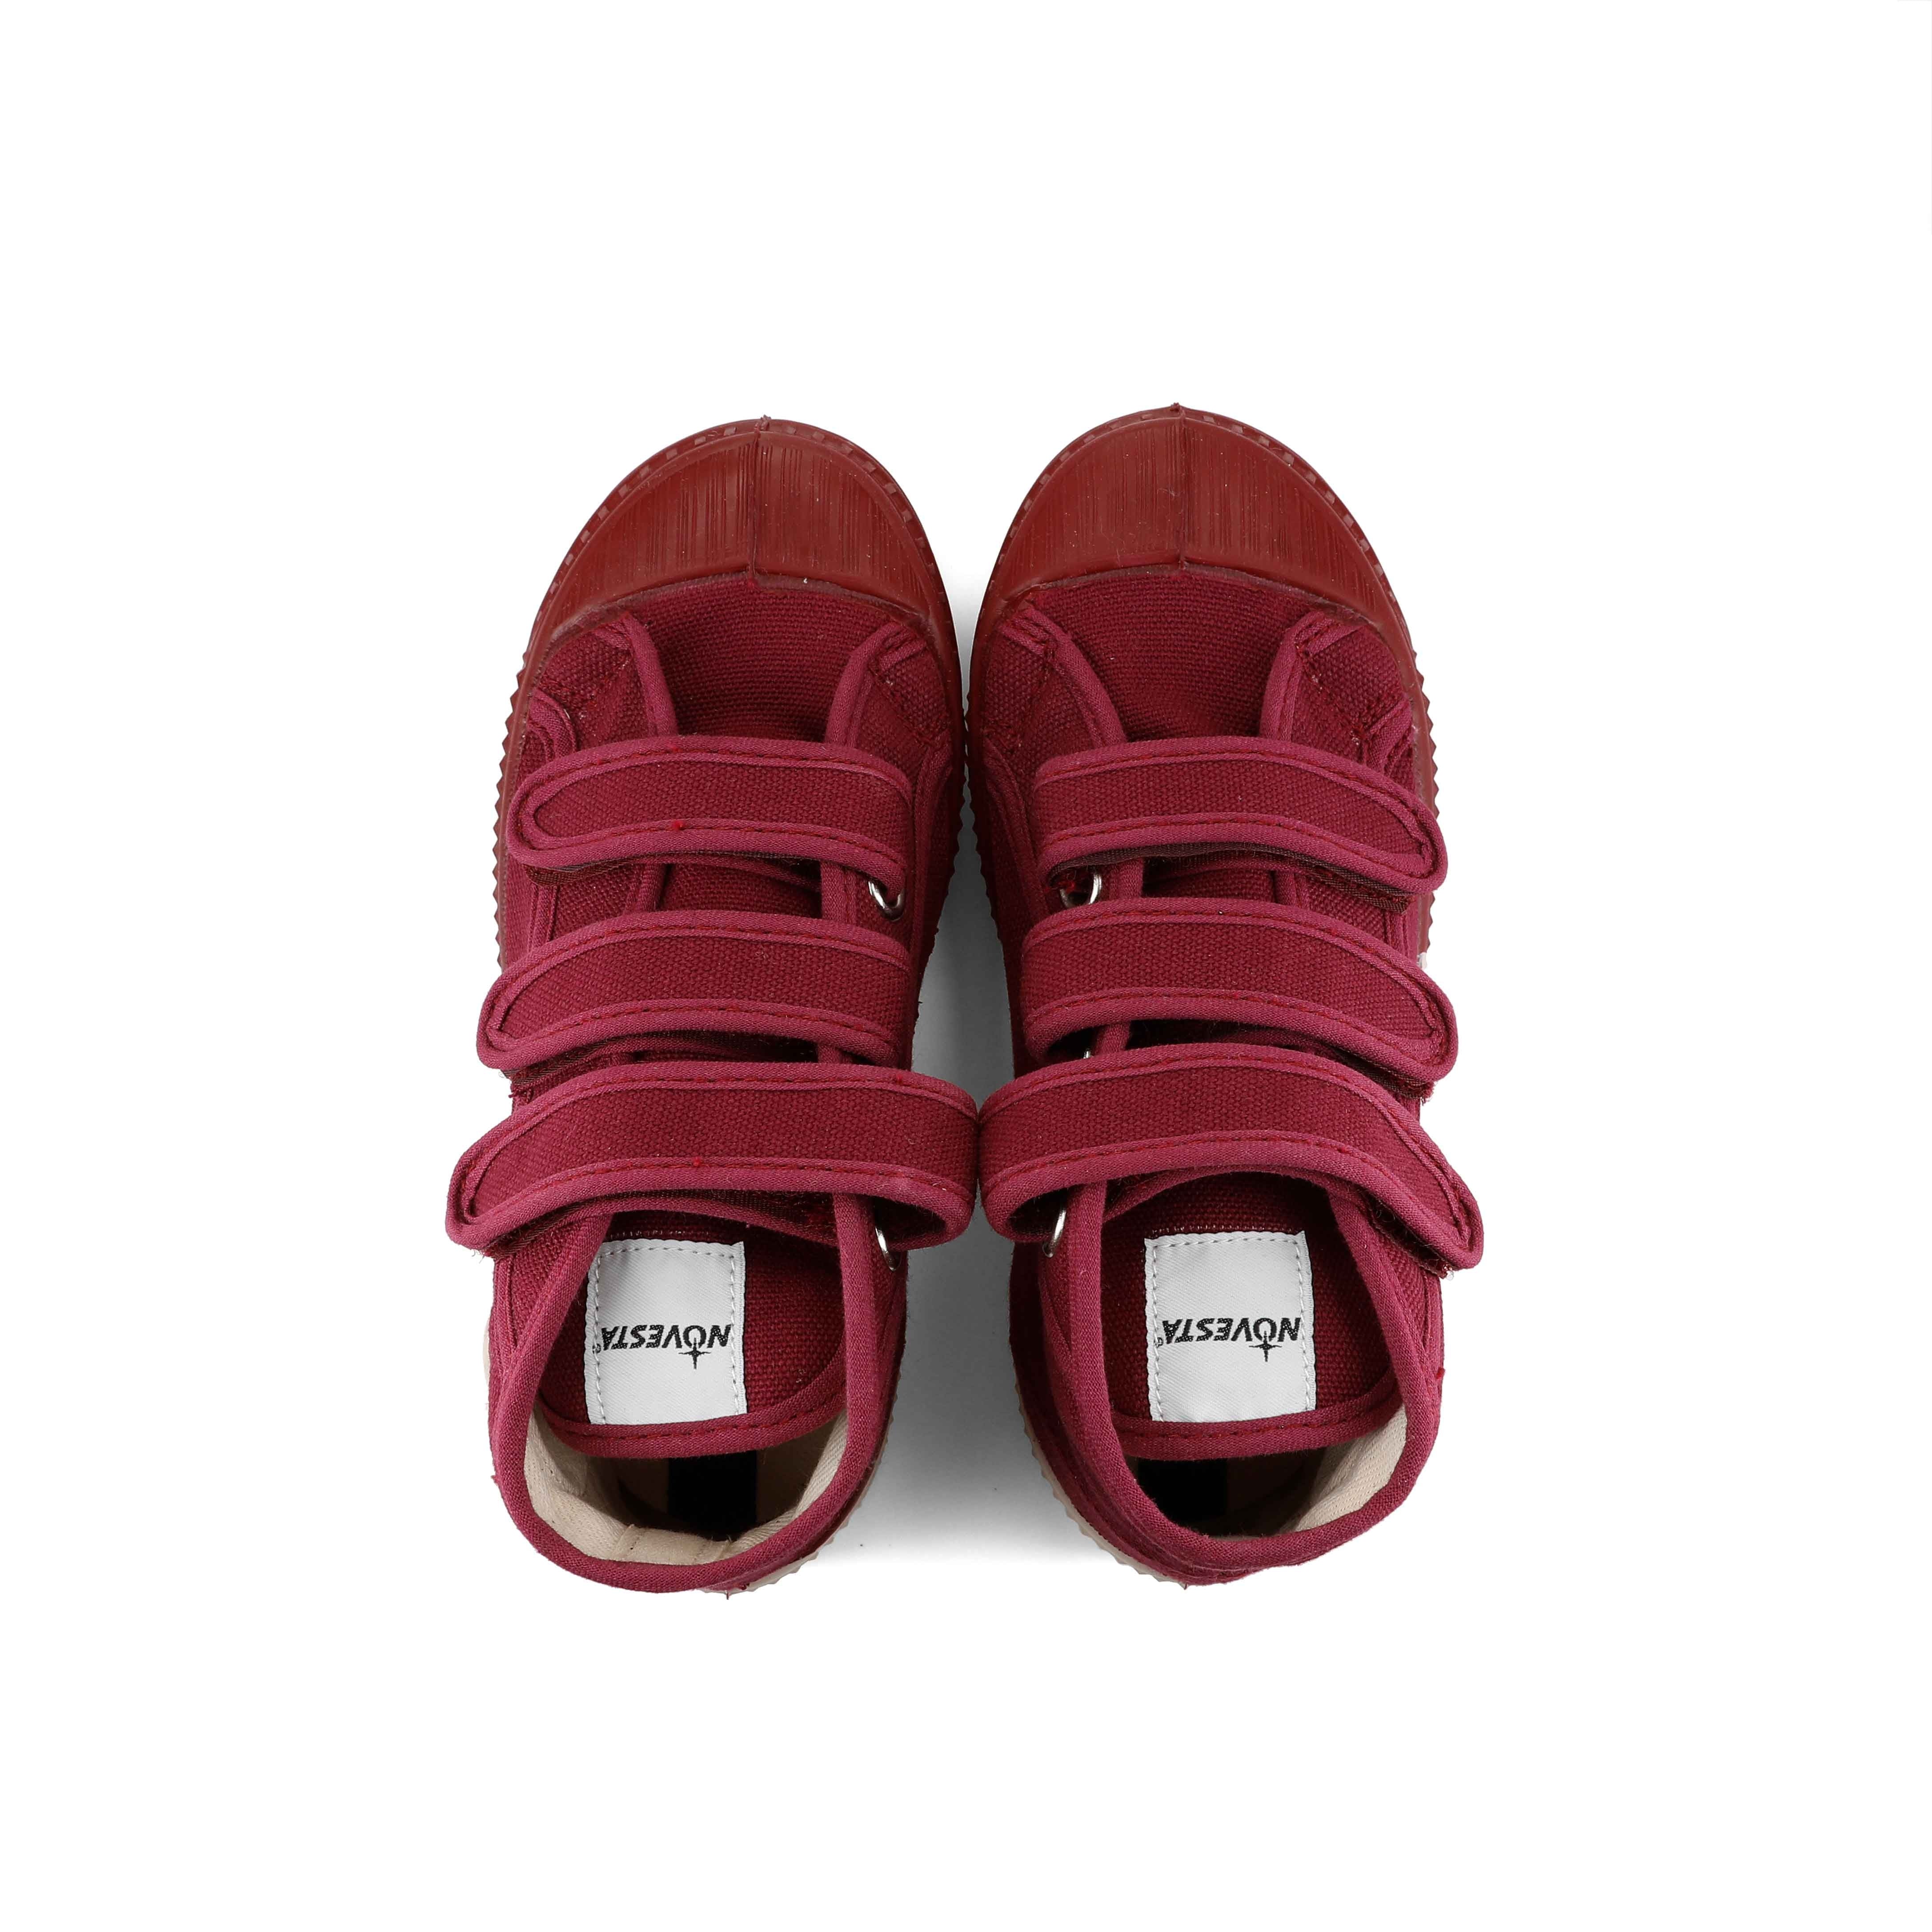 Boys & Girls Wine Red Canvas Shoes